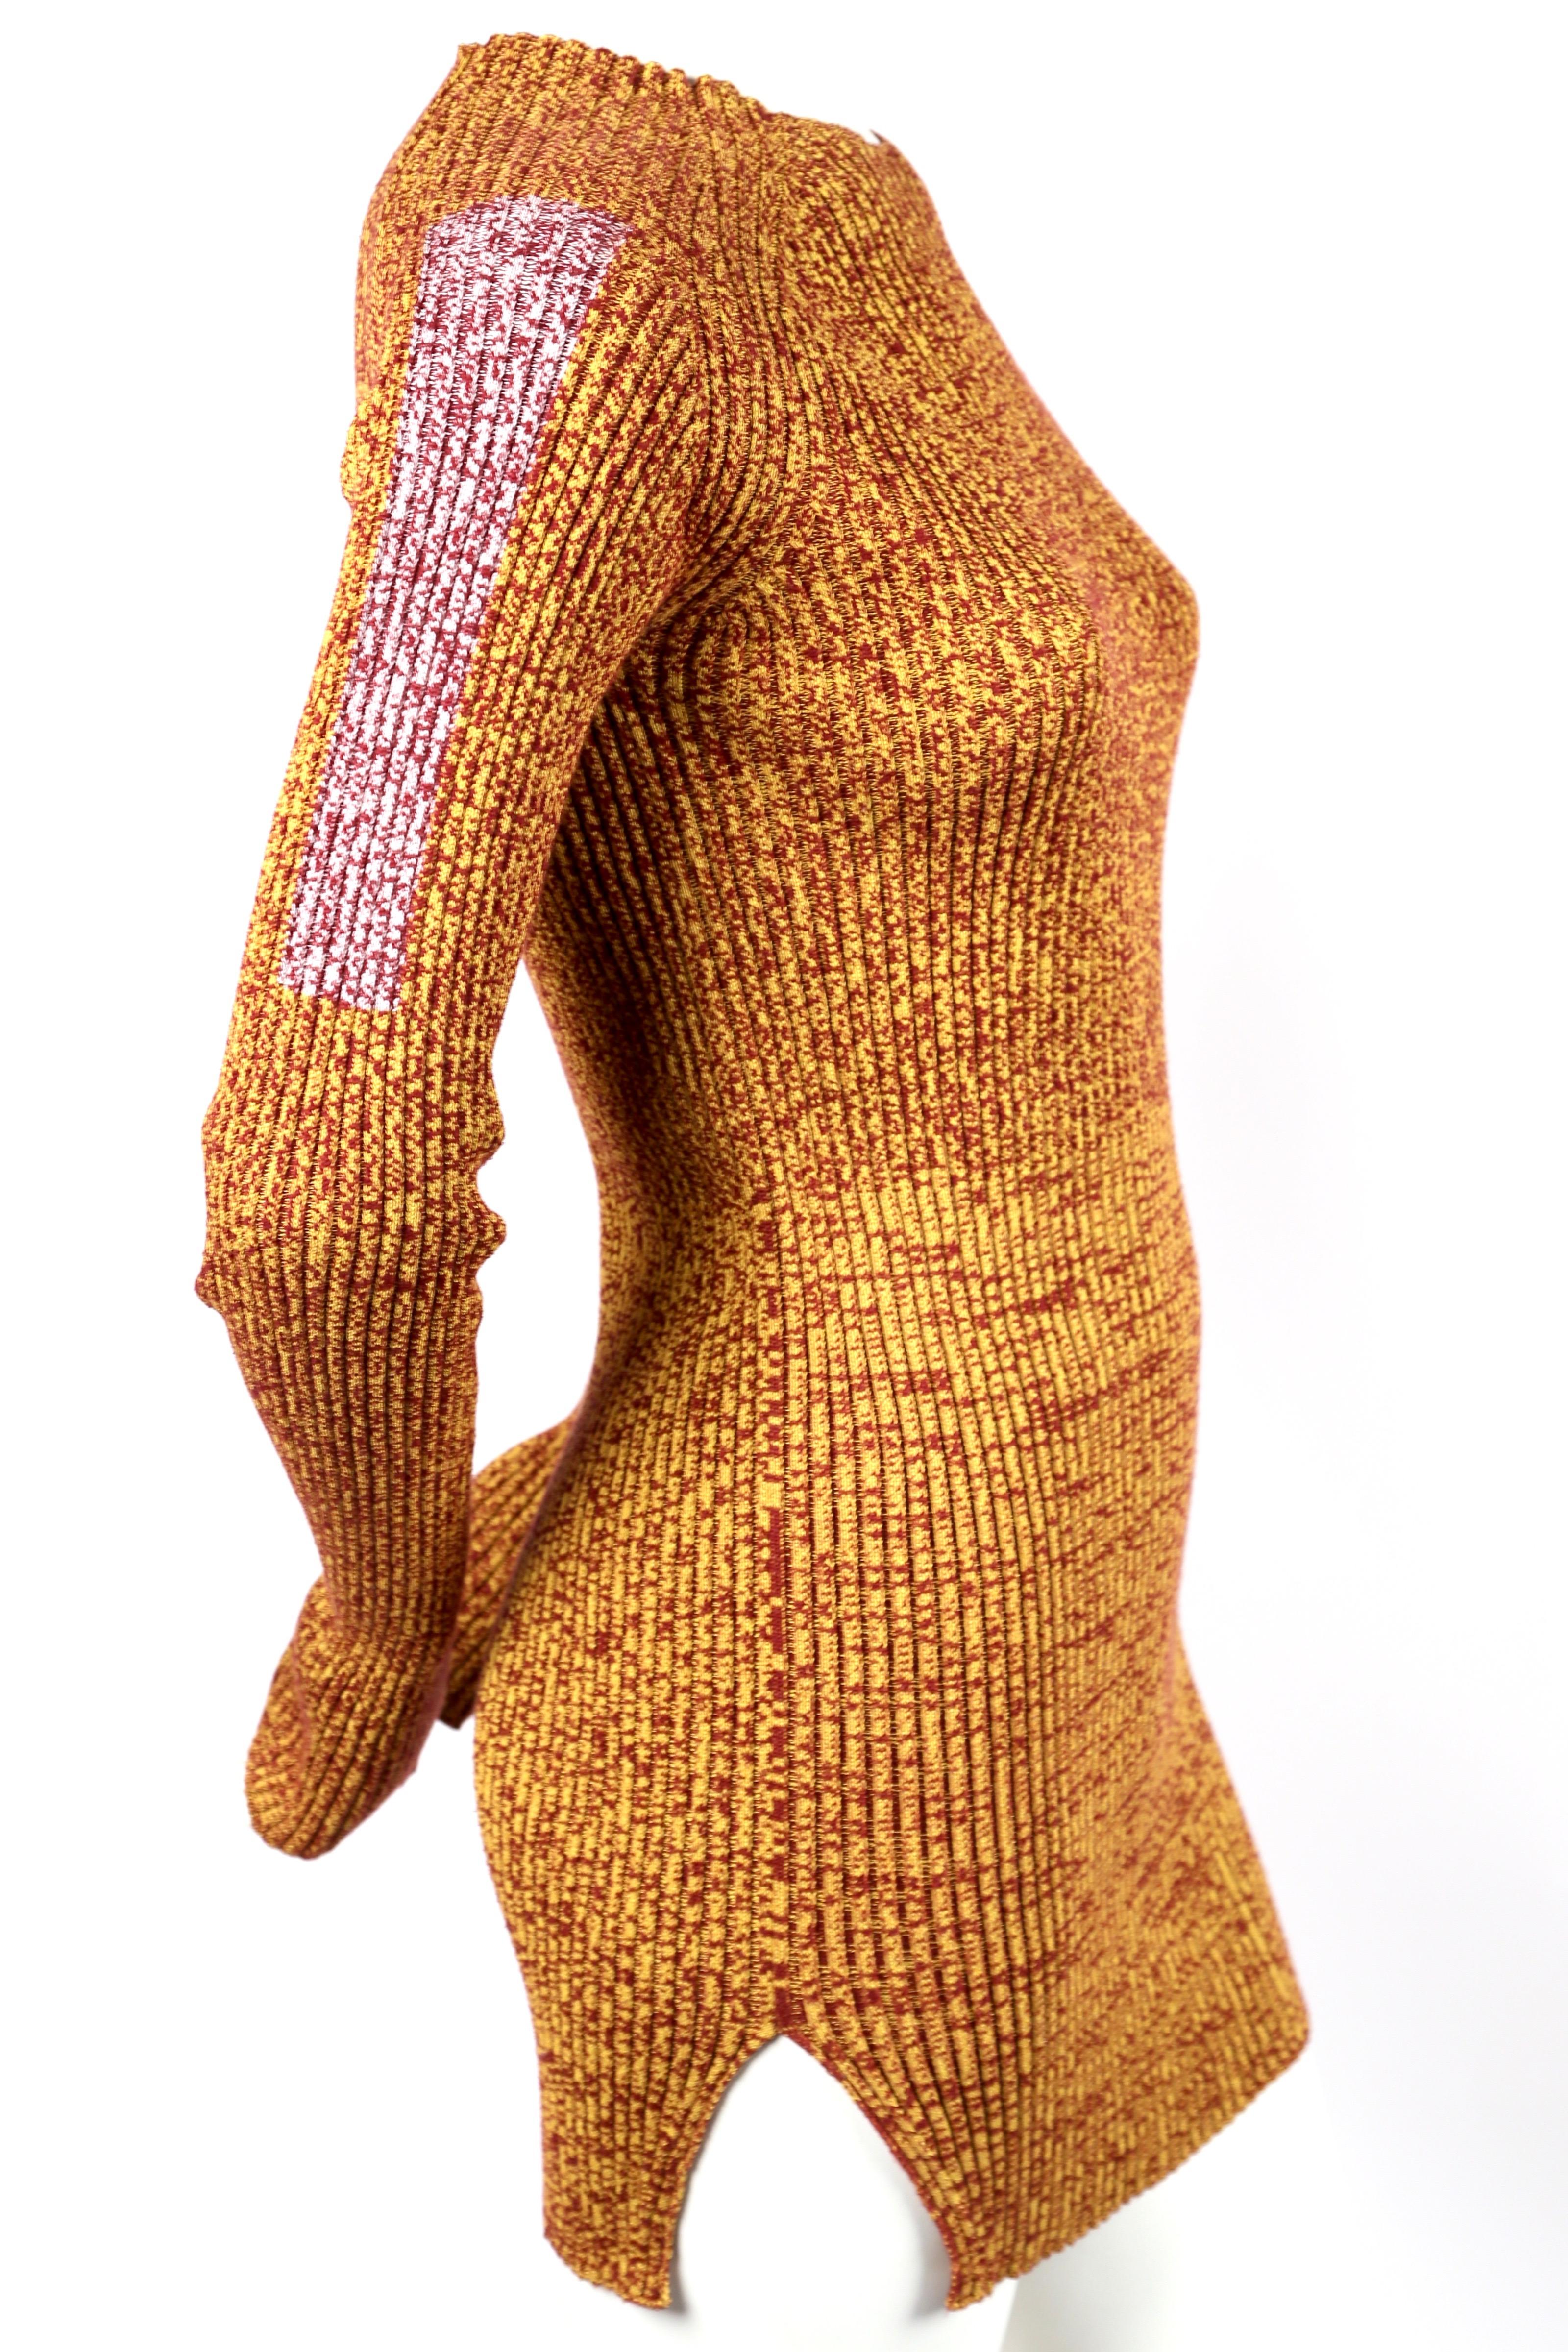 Yellow and red marled knit tunic with slits designed by Phoebe Philo for Celine dating to resort of 2015. Also, featured in the Celine 2015 spring ad campaign. French size XS. Approximate measurements (unstretched): bust 26